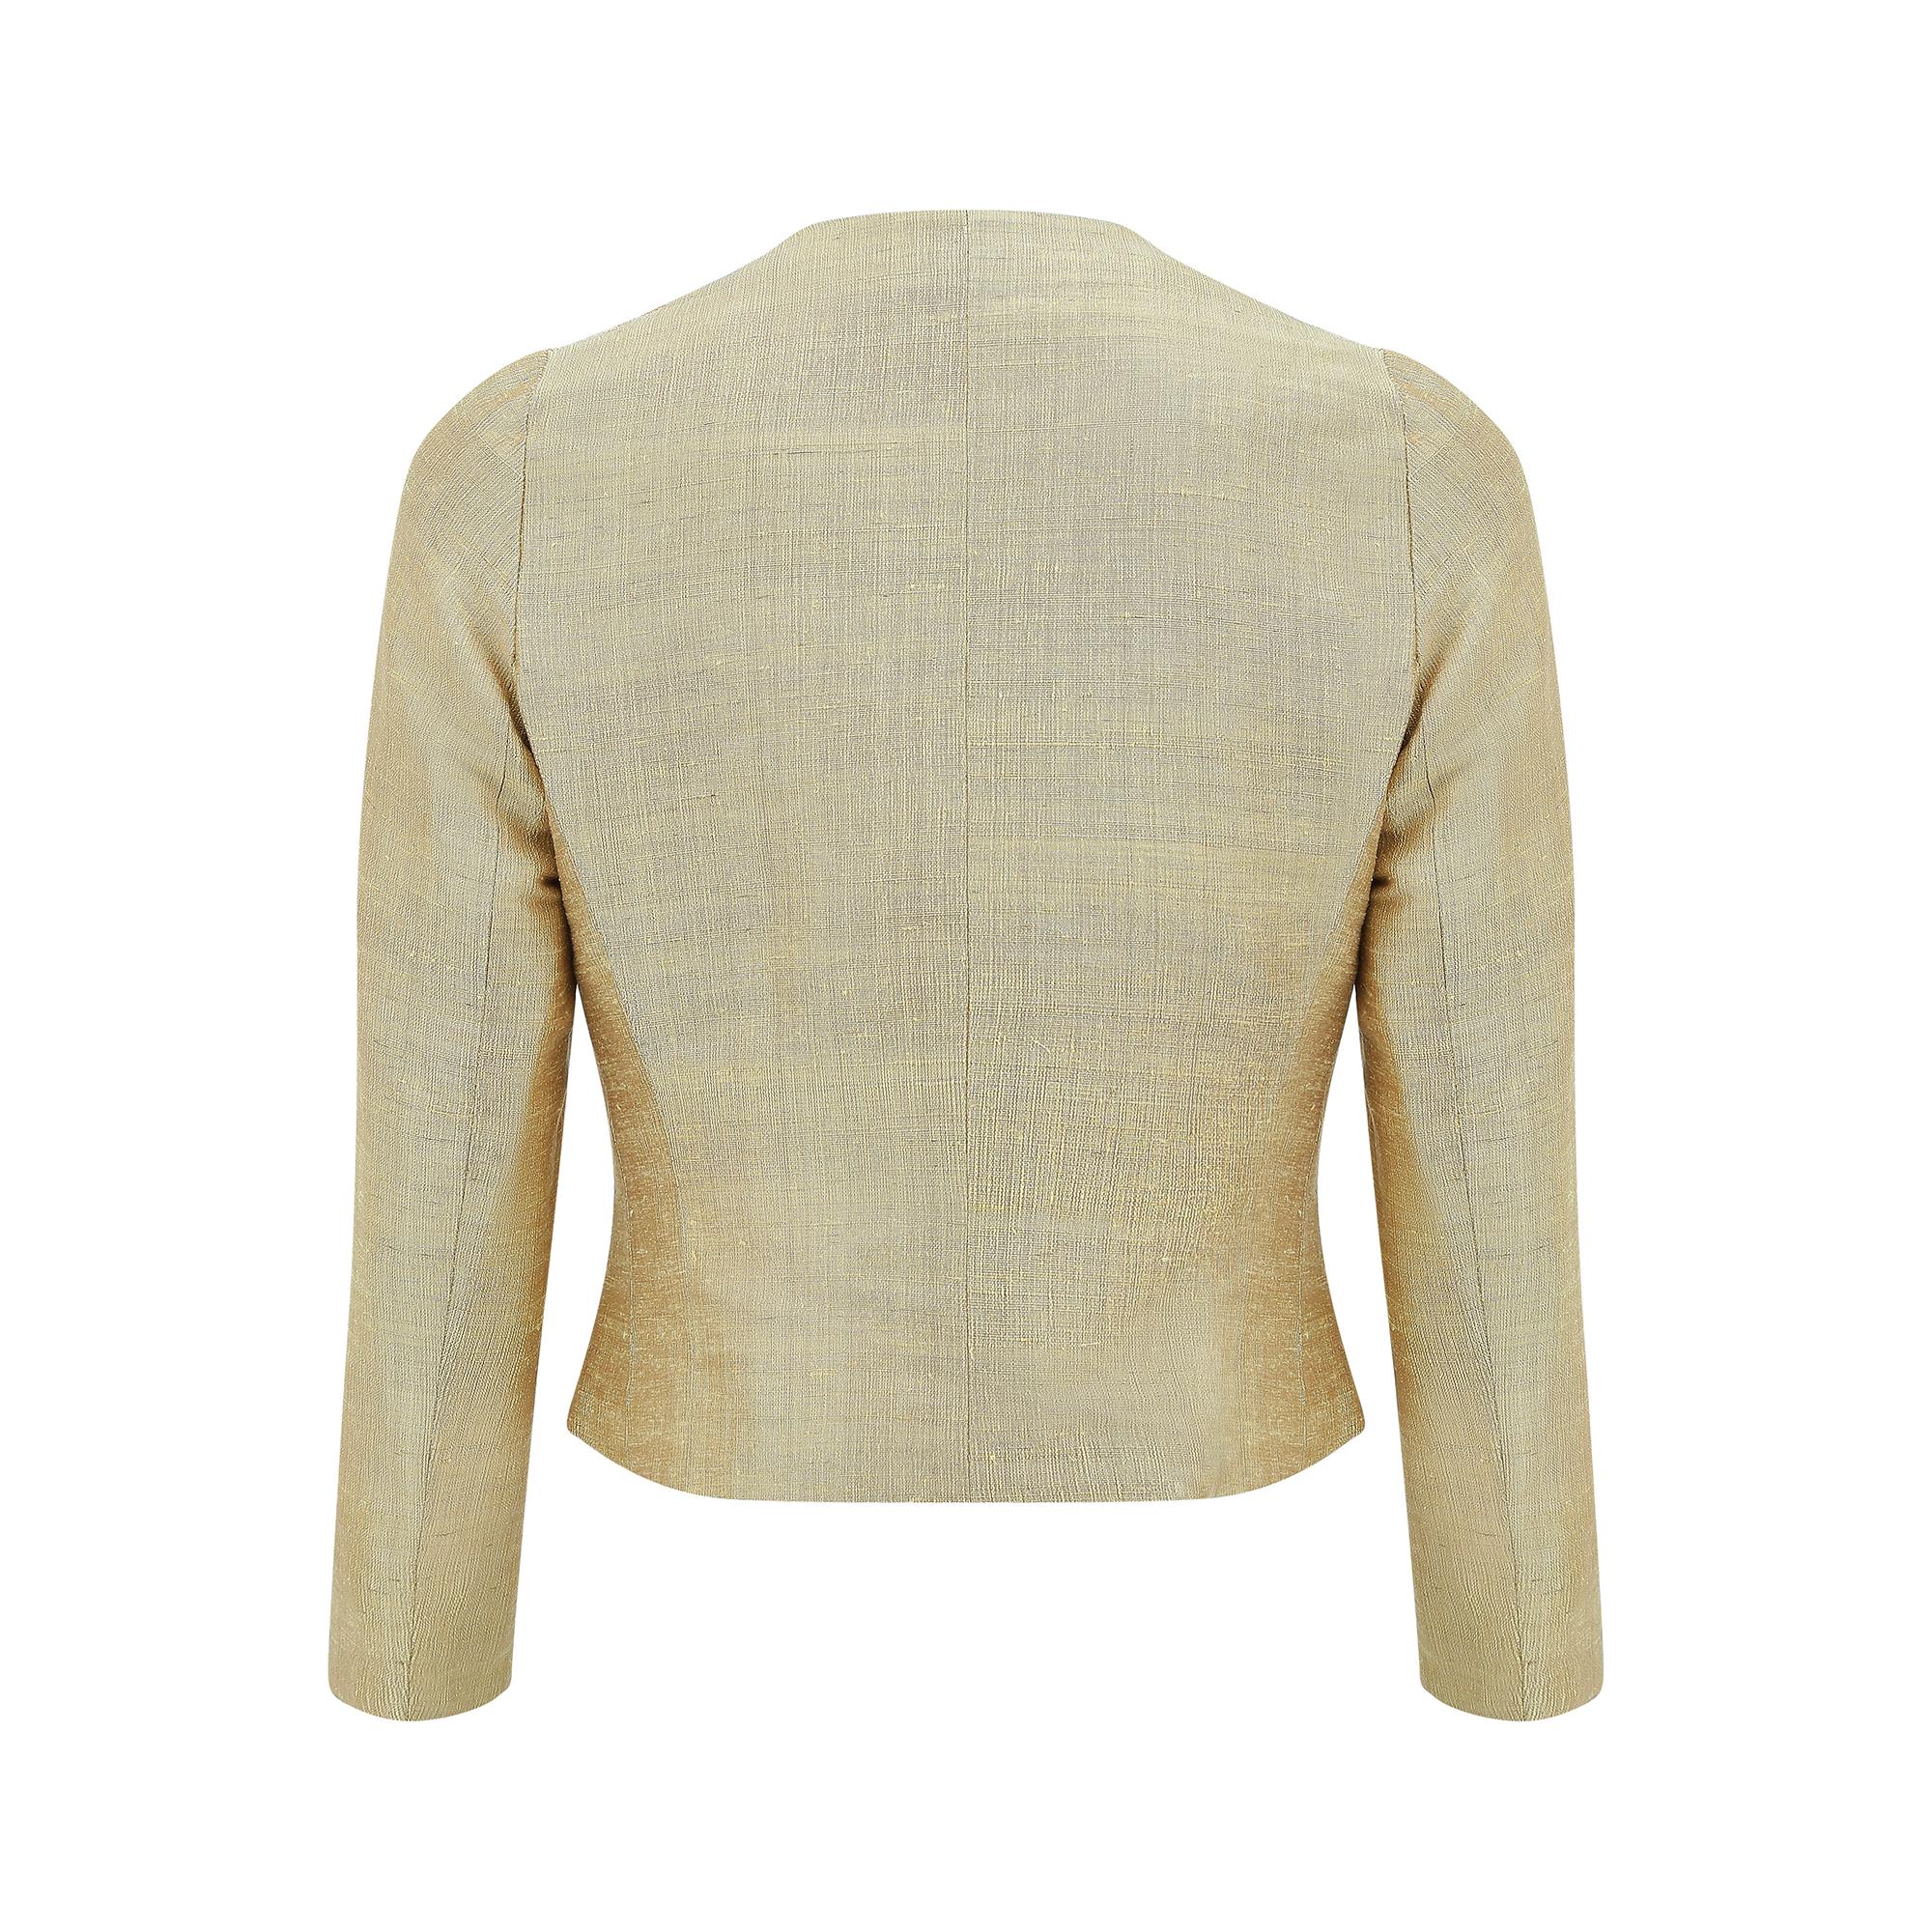 Women's 1960s Tilly Gerland Gold Jacket with Frog Fastenings For Sale